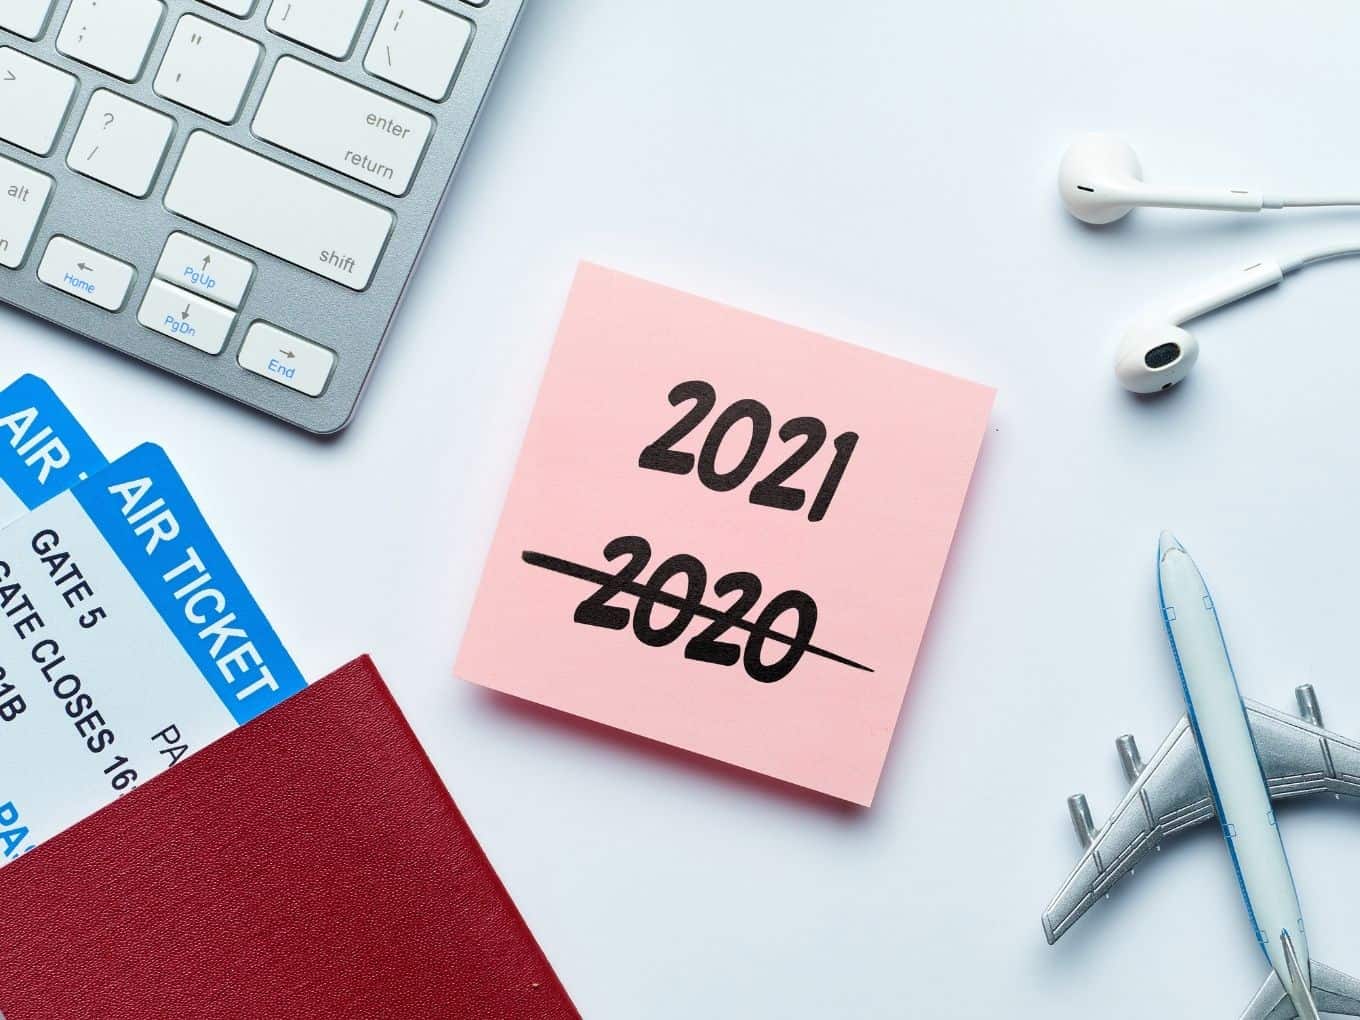 Travel-Industry-Changing-For-The-Better-In-2021